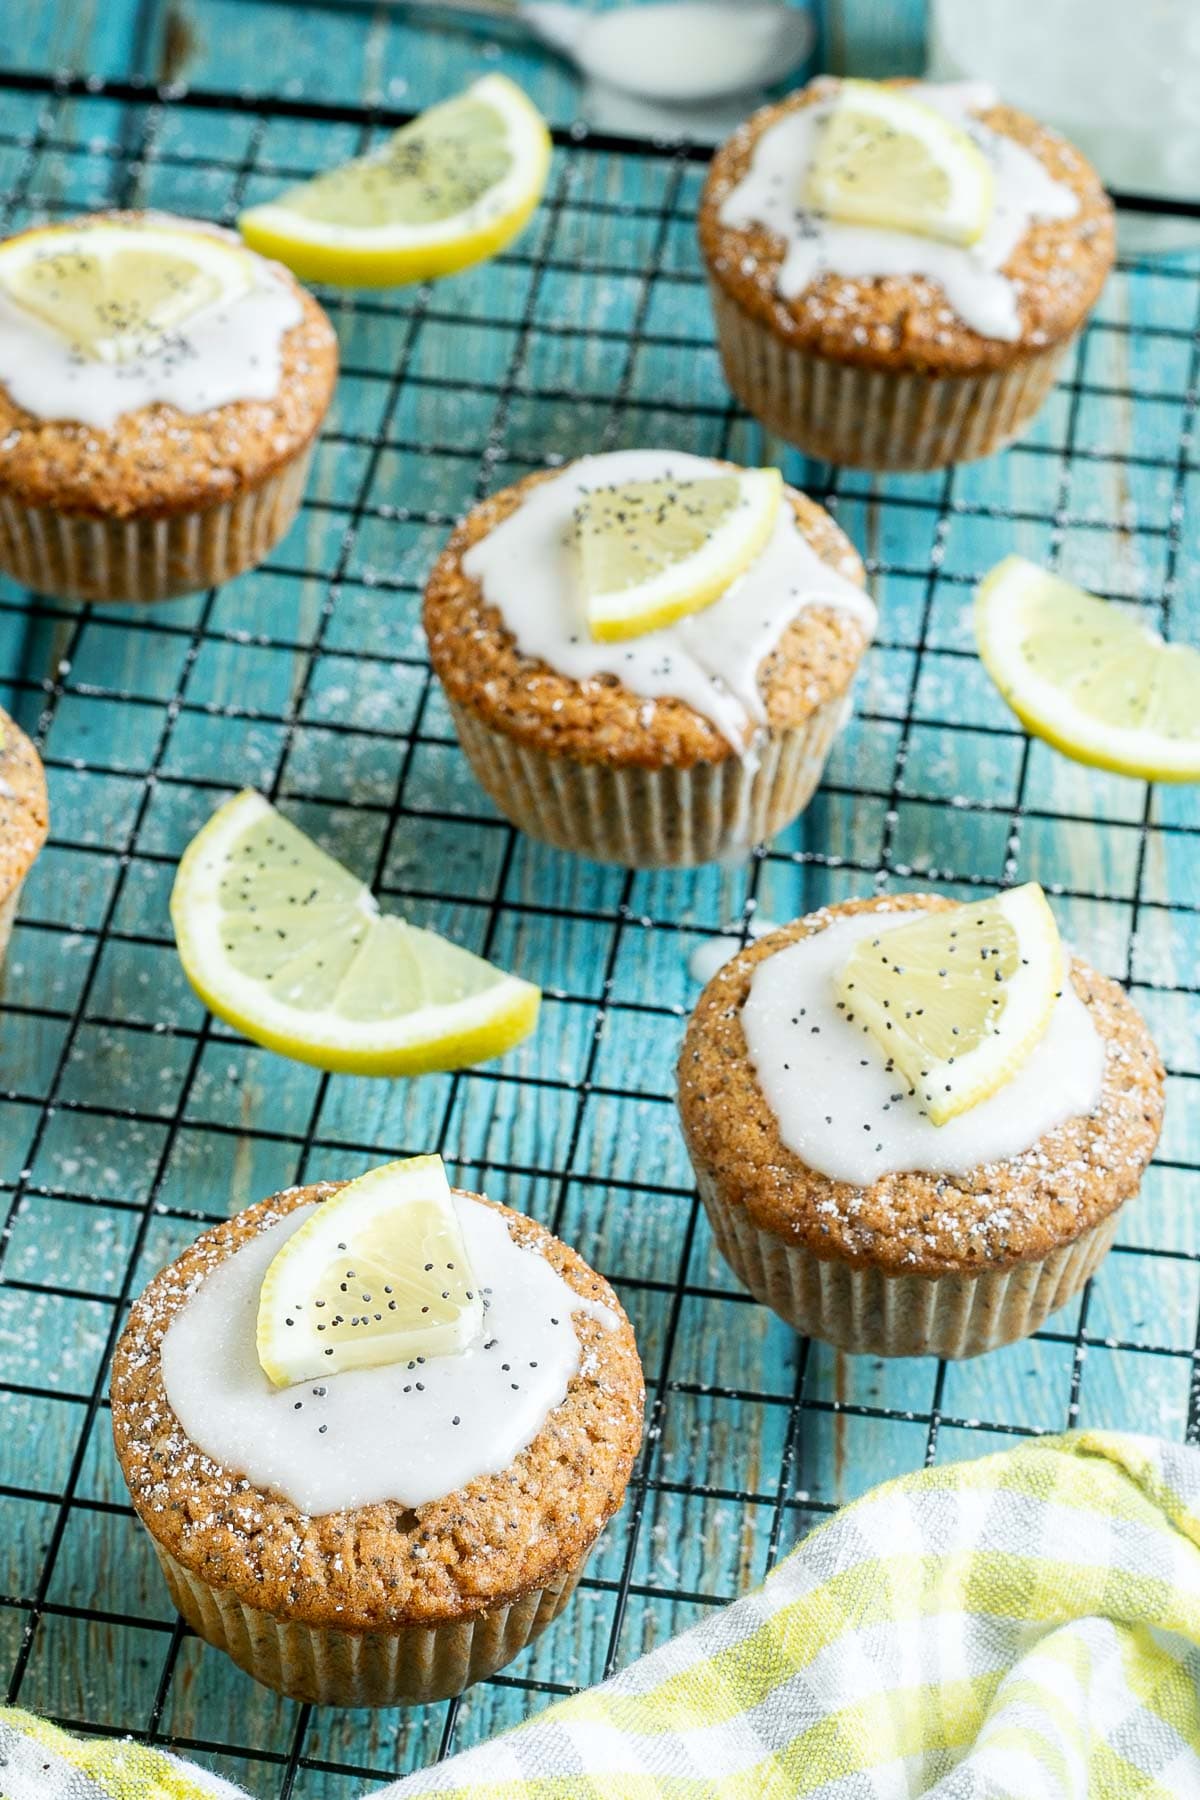 Several lemon poppy seed muffins on a black wire rack topped with a white glaze and a small lemon slices, and sprinkled with poppy seeds. Lemon slices are scattered around them.